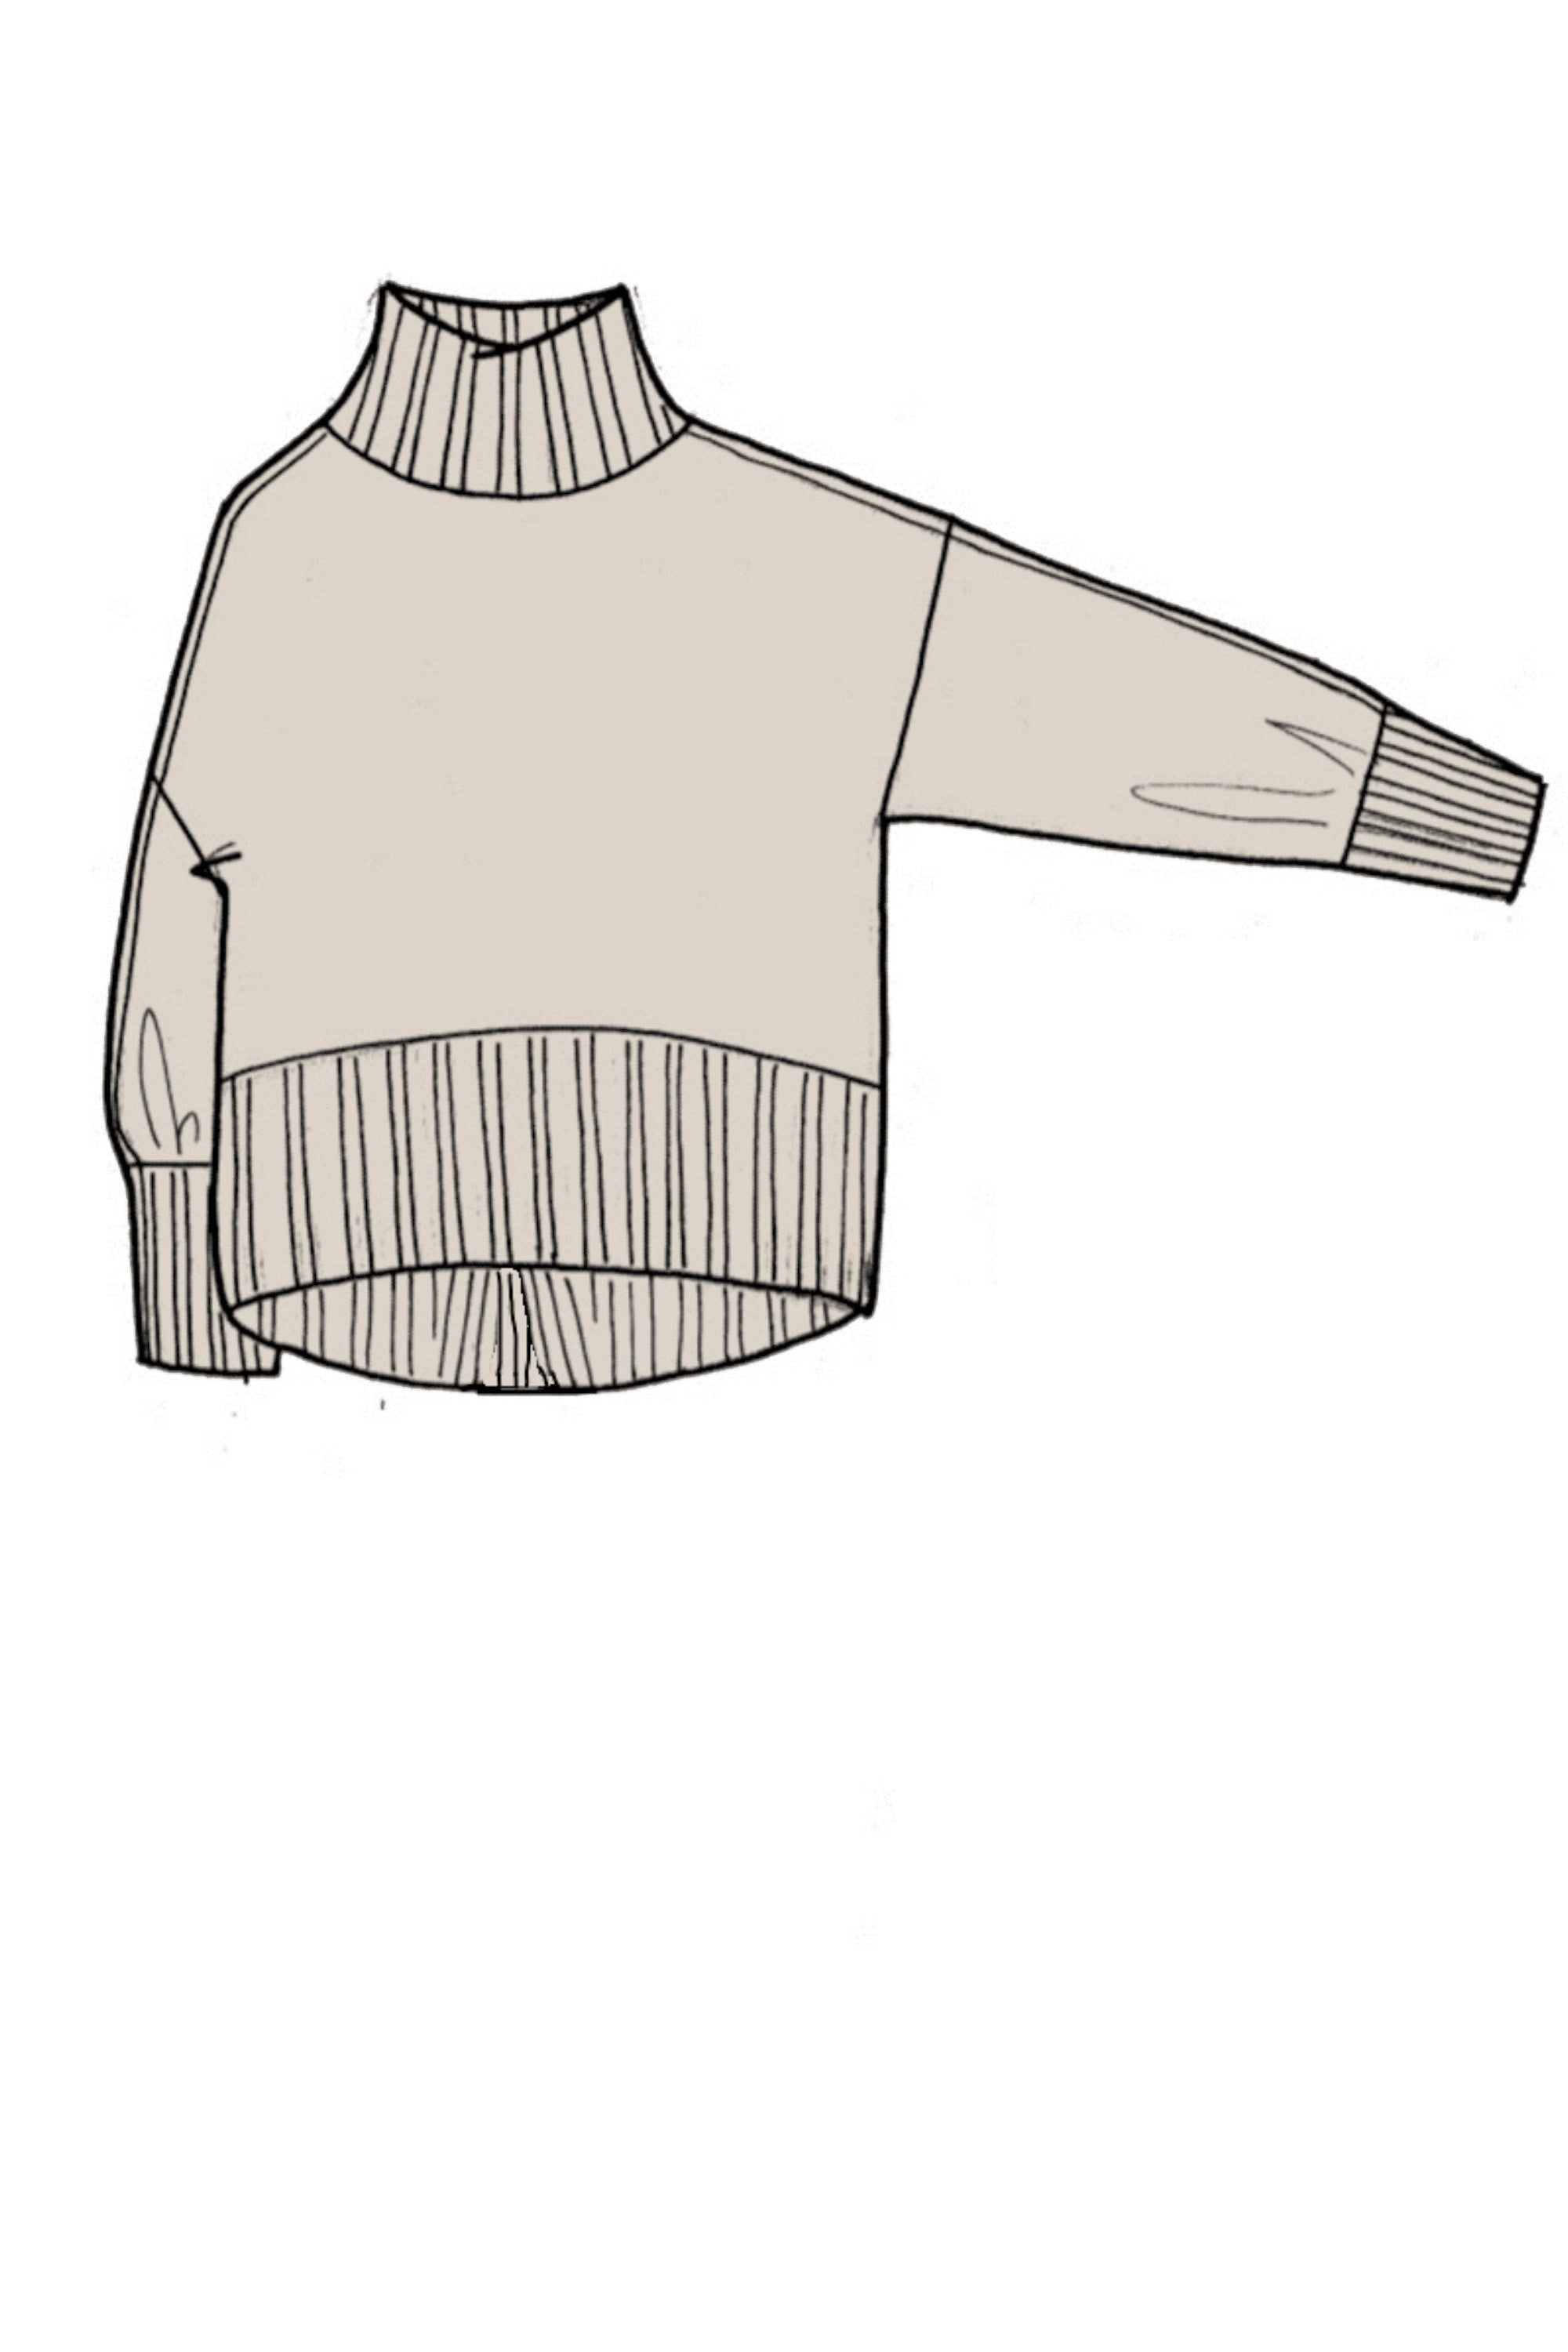 Oversized Cashmere Polo Neck Sweater - Made to Order